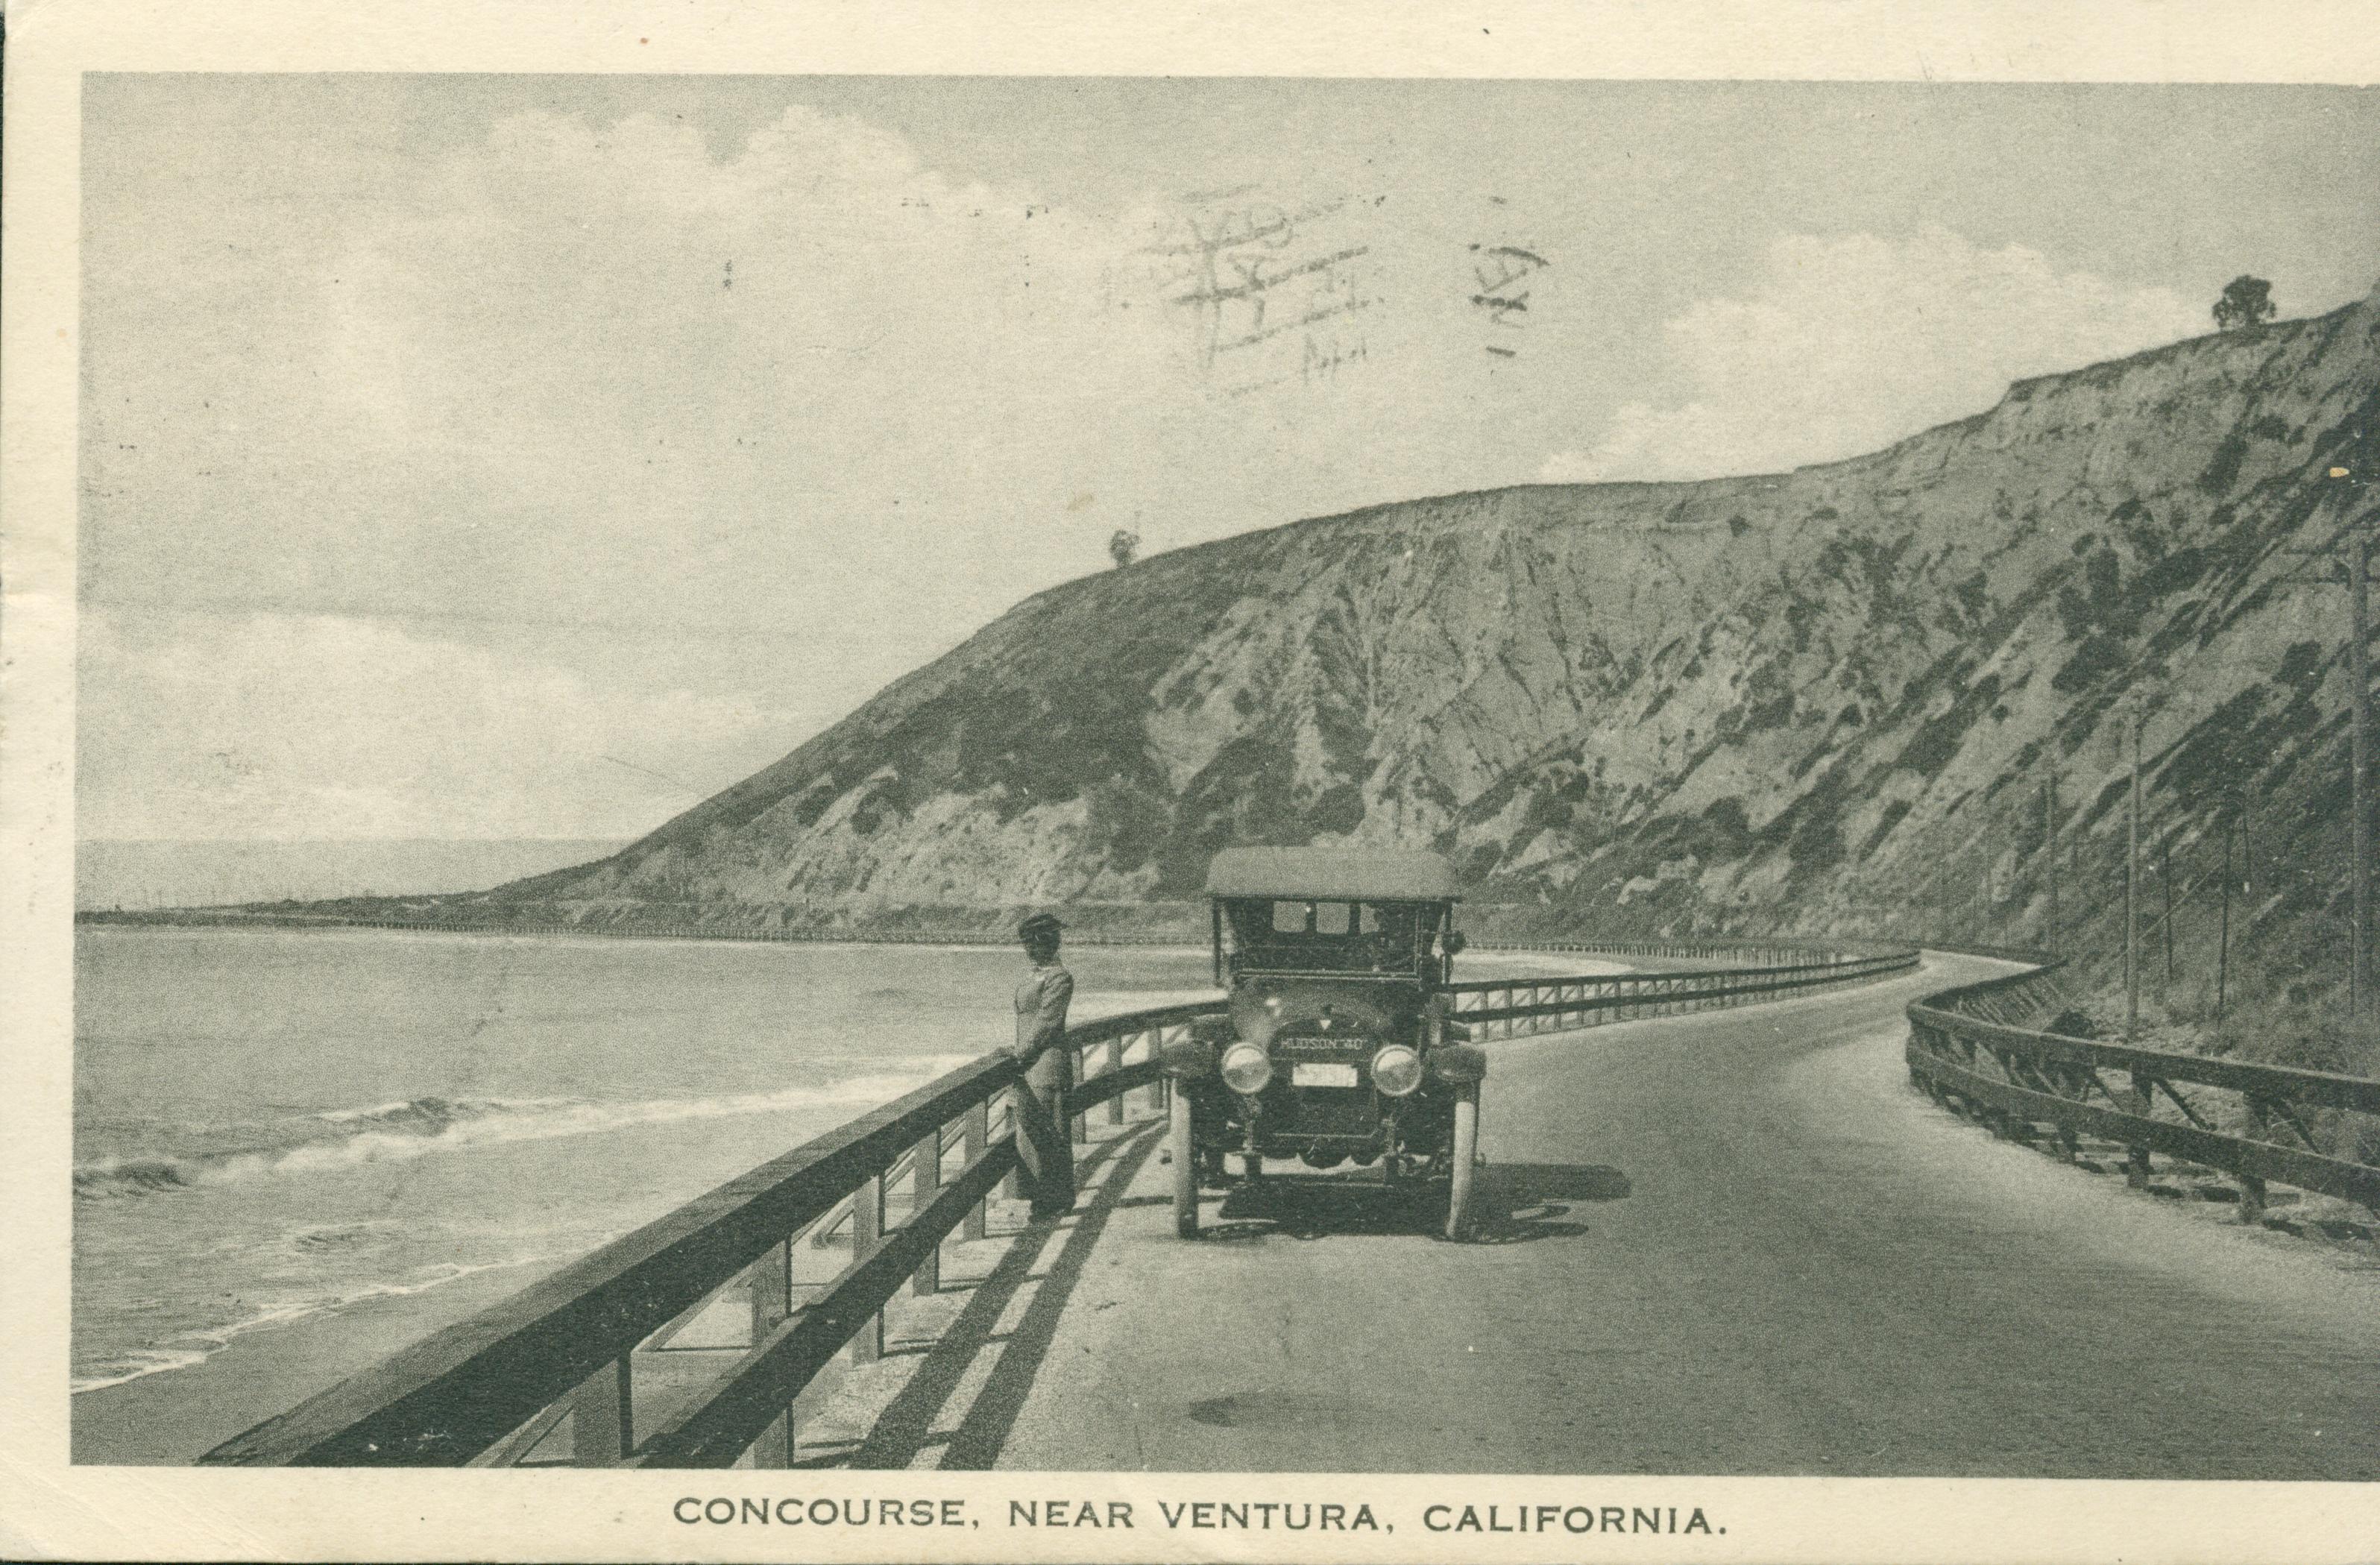 Shows a woman looking down at the beach by a car, stopped in the middle of a coastal highway